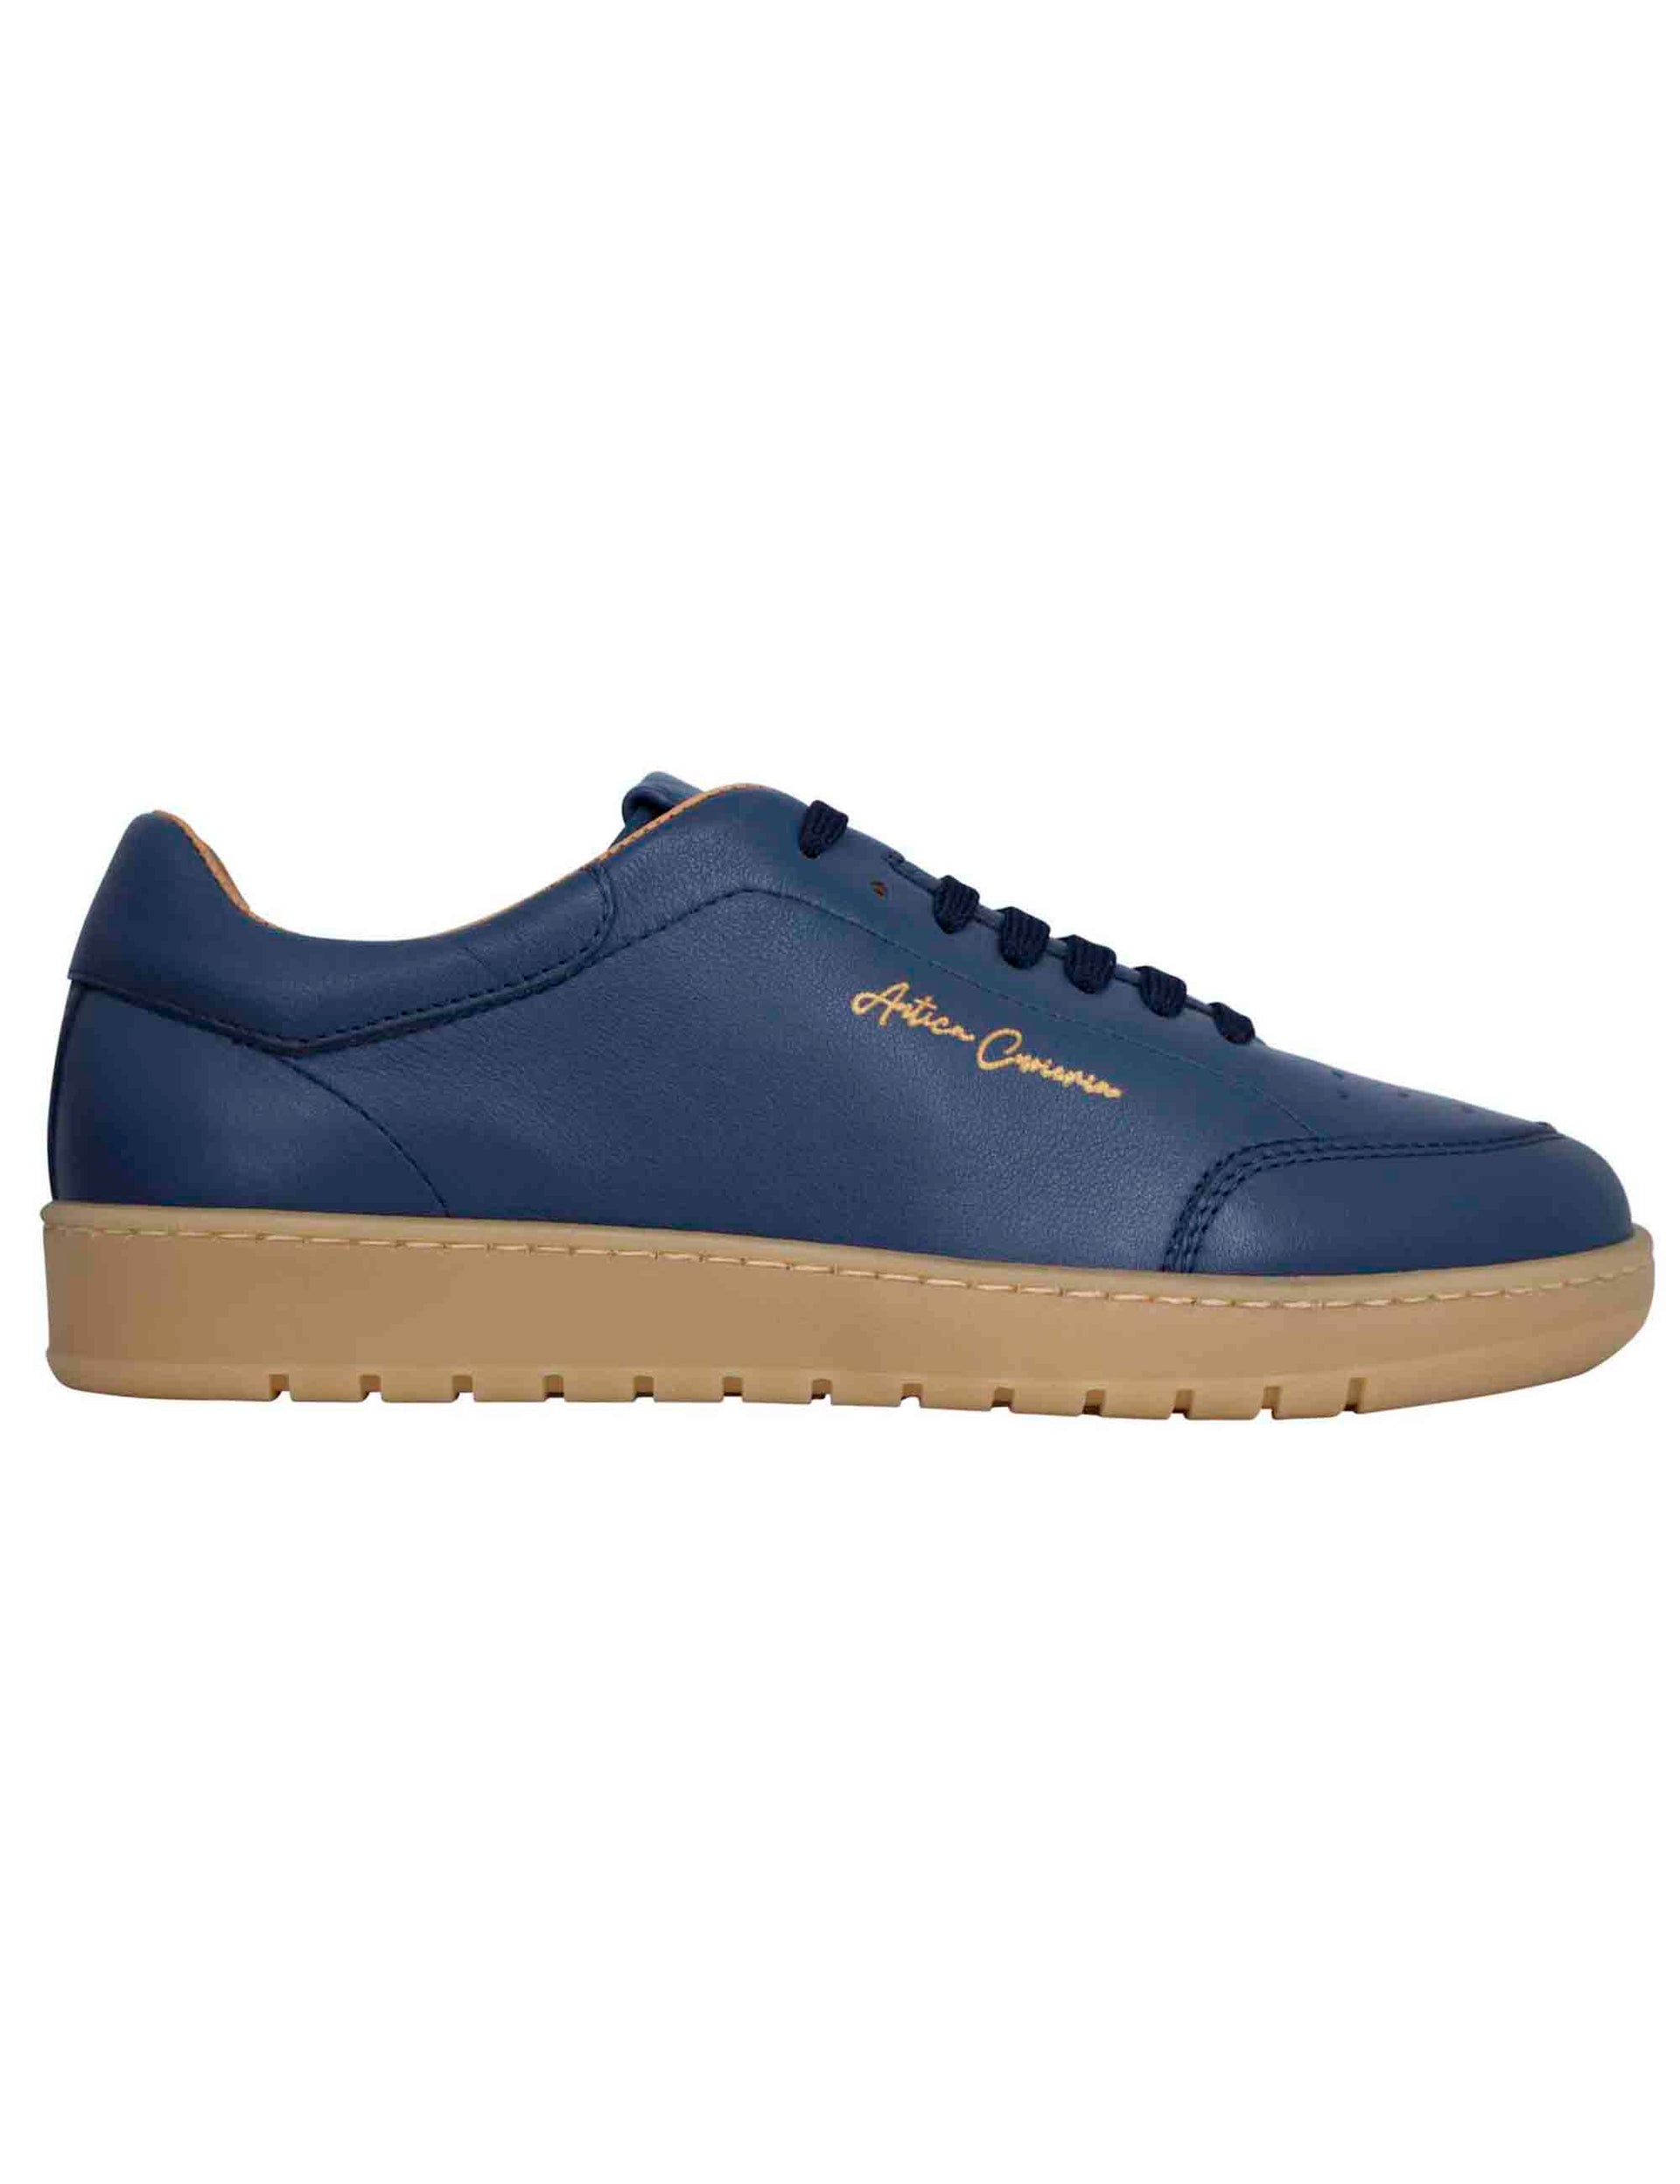 Men's sneakers in light blue leather with amber rubber sole